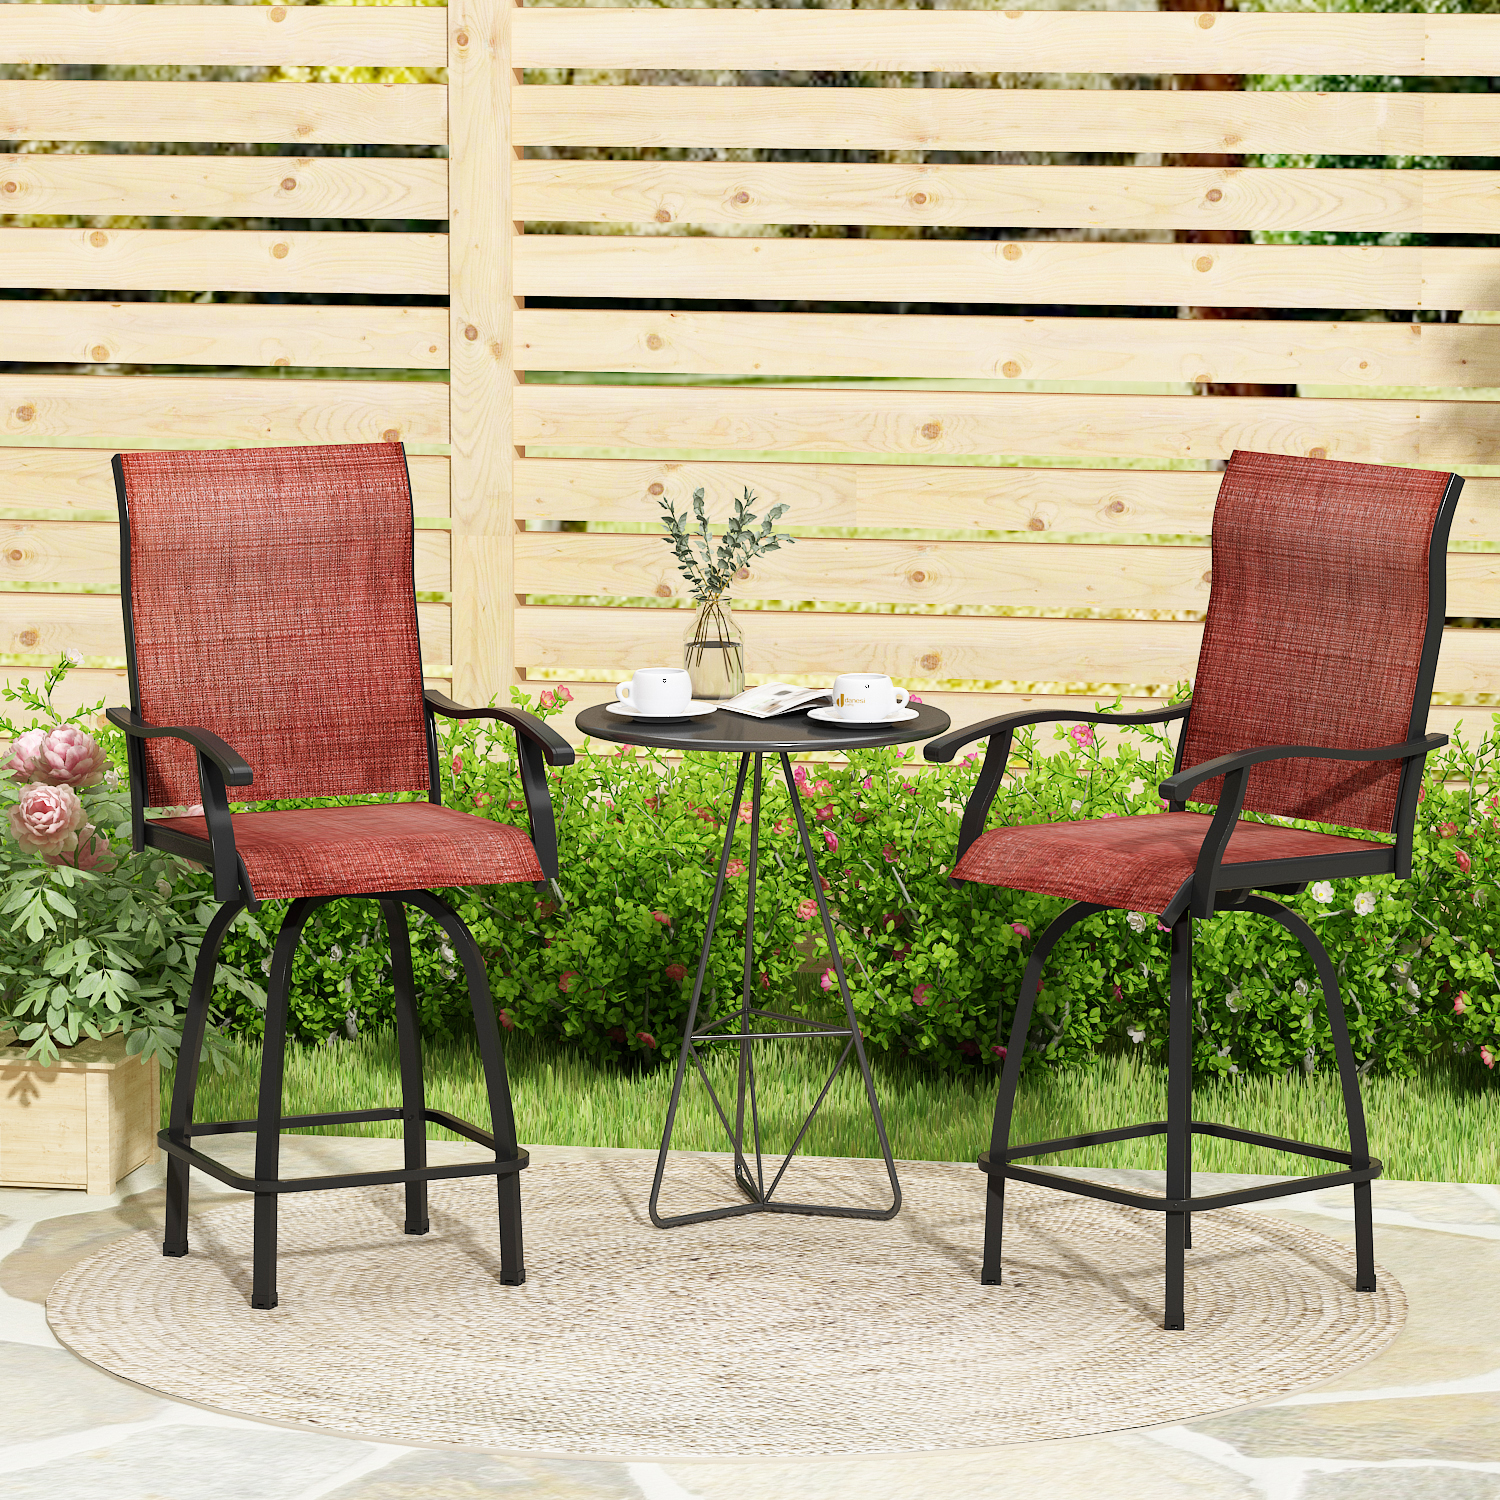 Homsee 2 Pack Patio Swivel Bar Height Patio Bistro Set, 360-Degree Swivel Outdoor Bar Stool, Red - image 3 of 8